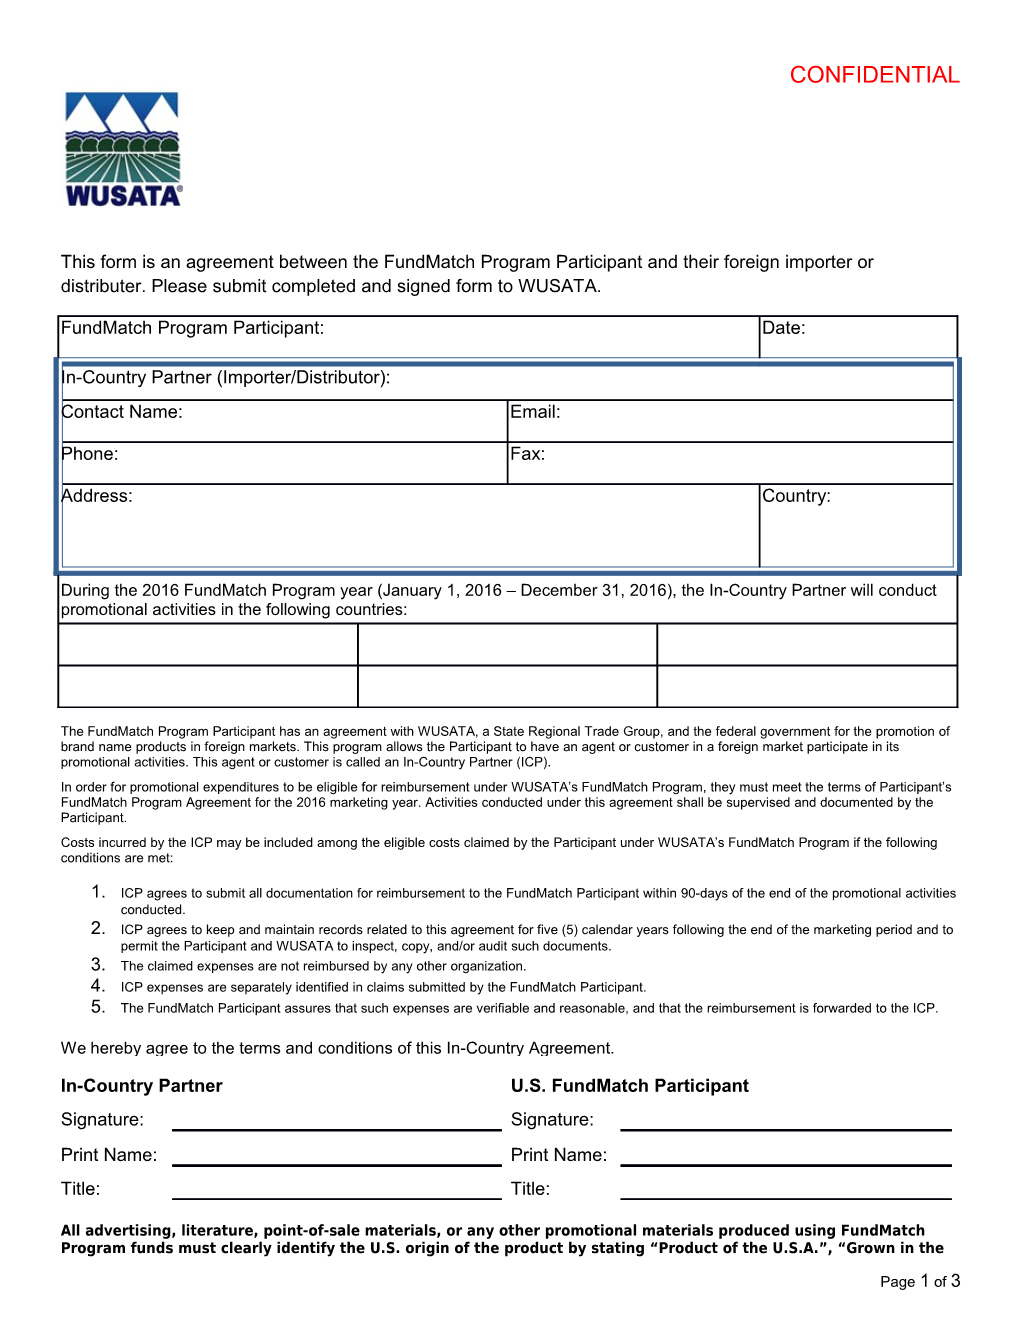 This Form Is an Agreement Between the Fundmatch Program Participant and Their Foreign Importer